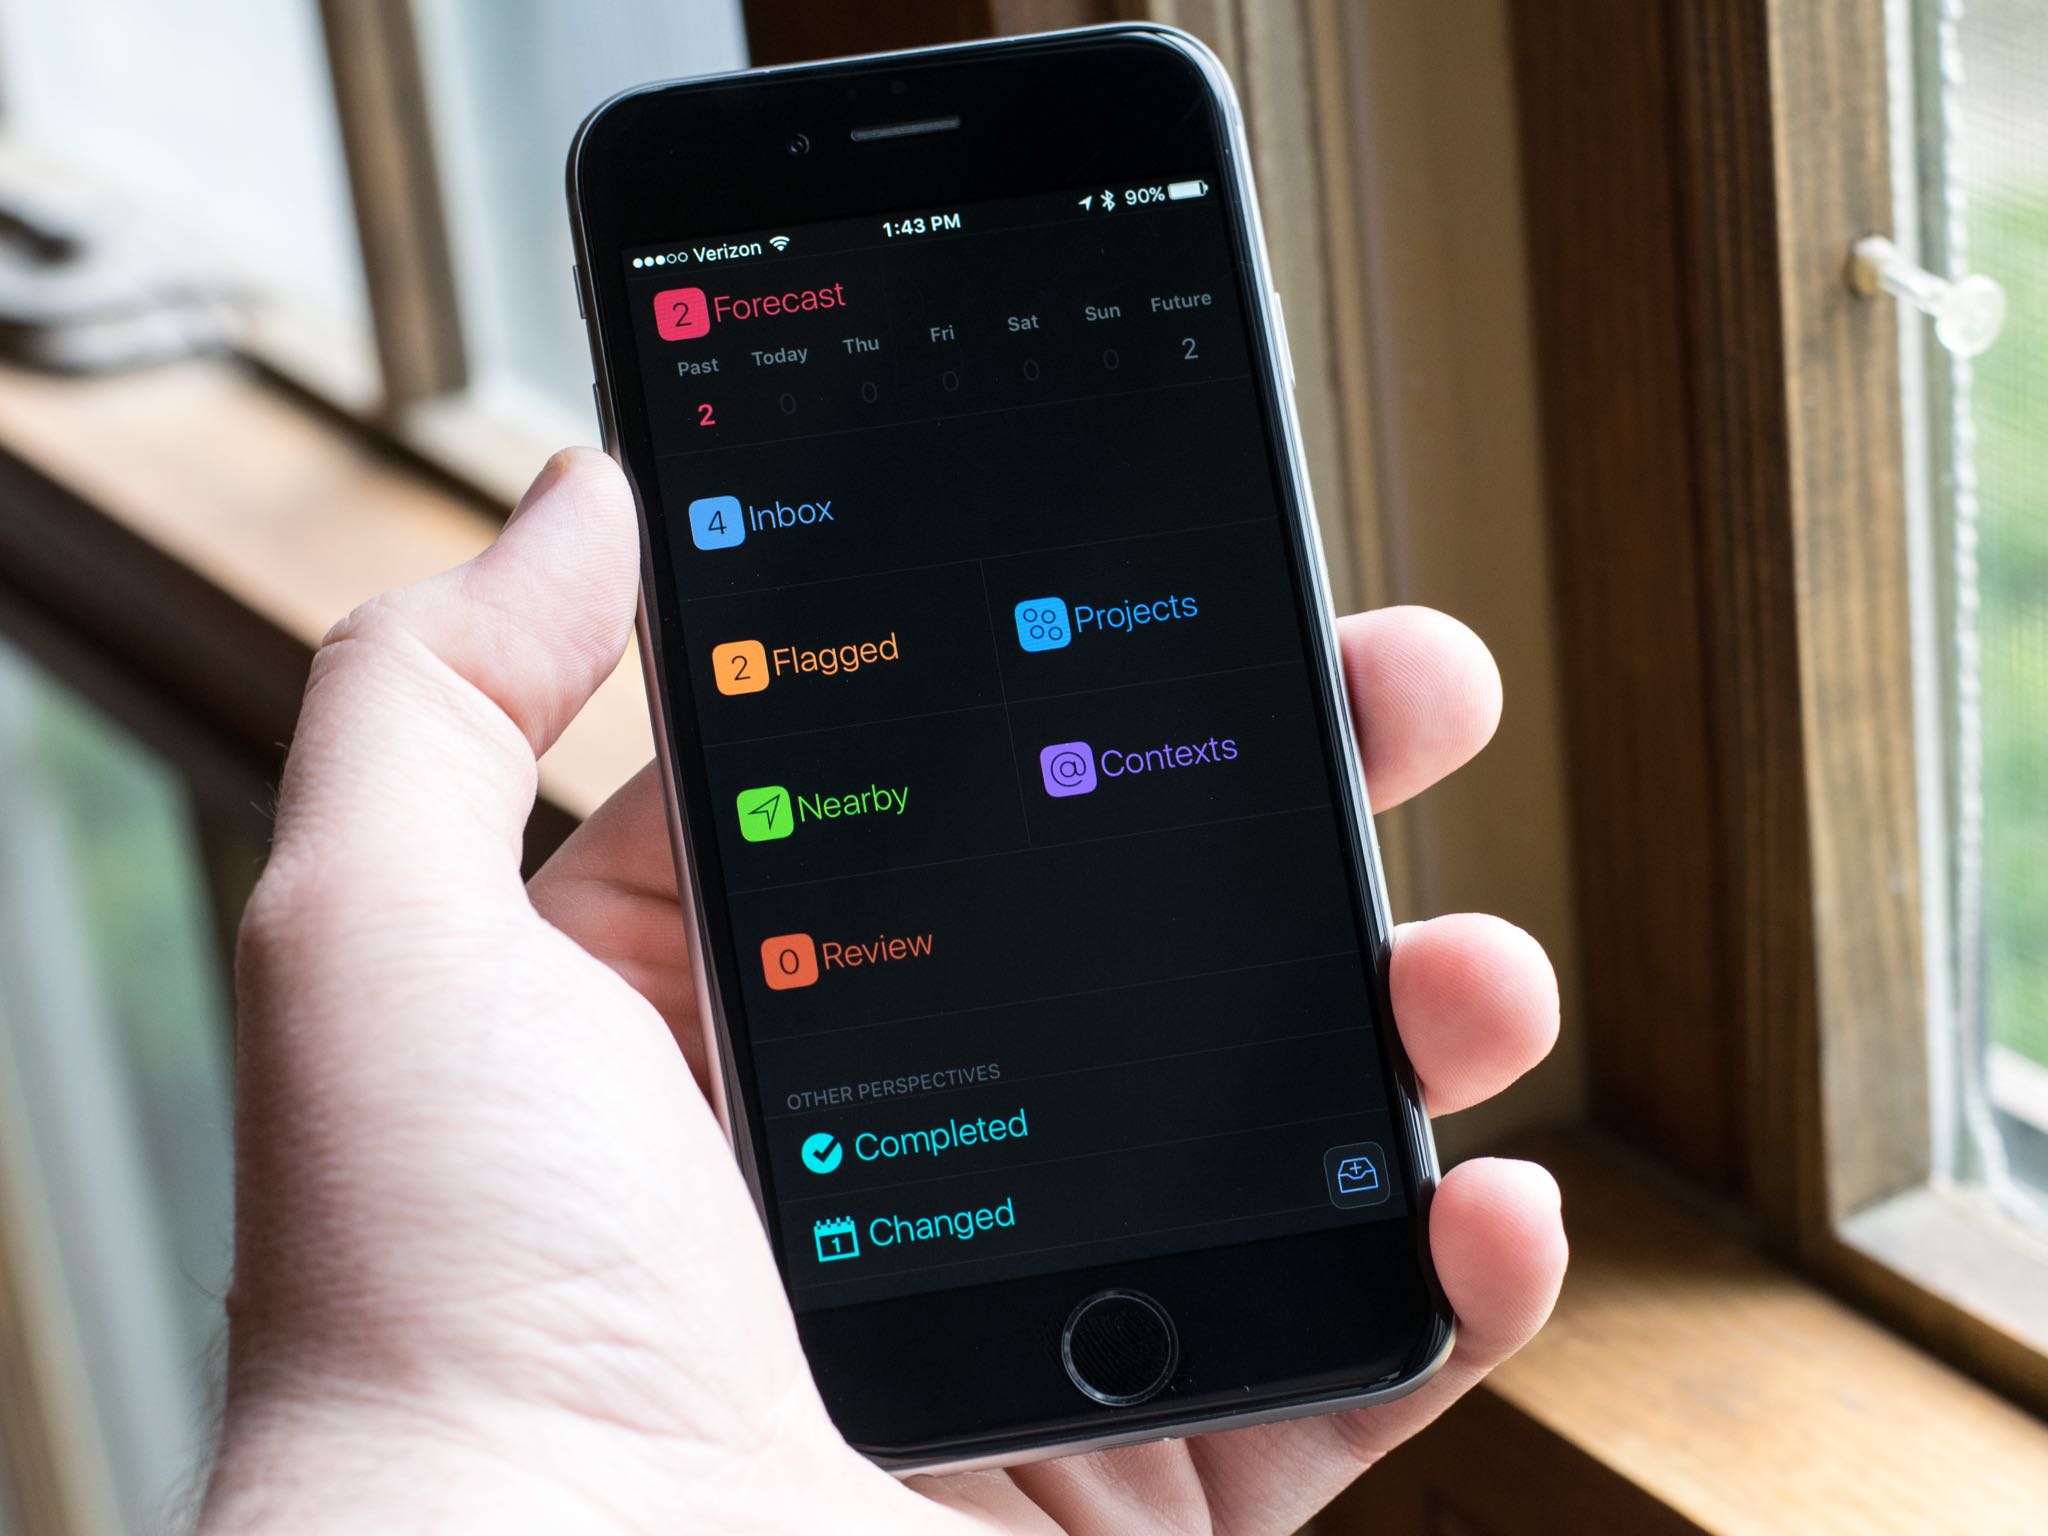 OmniFocus for iPhone and iPad gets push syncing support, adds a dark theme